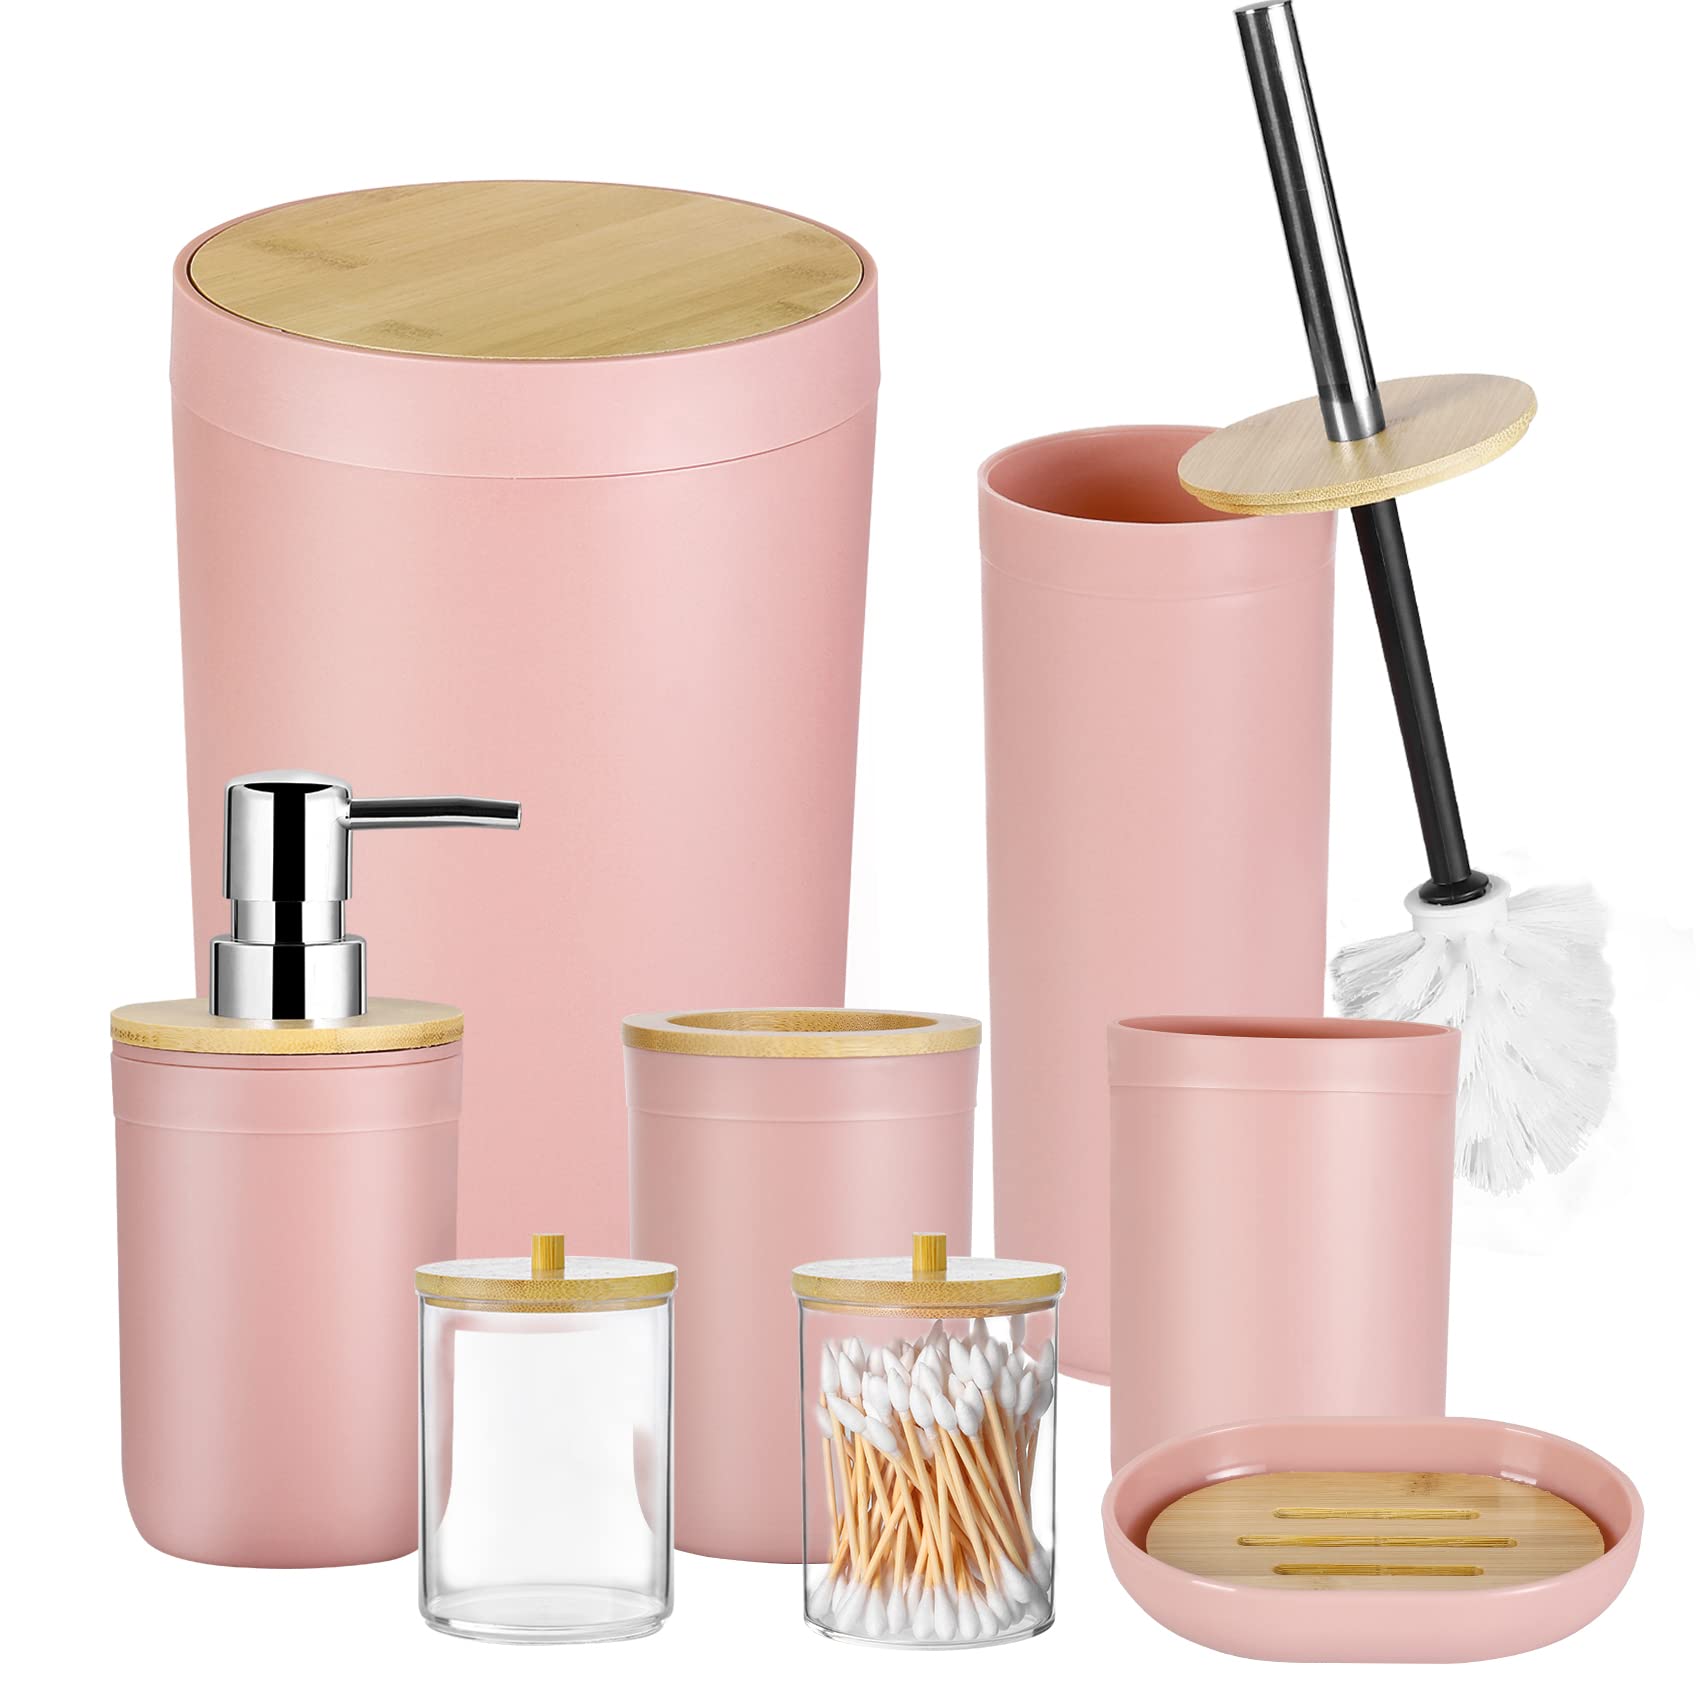 iMucci Imucci 8Pcs Pink Bathroom Accessories Set - With Trash Can,Toilet  Brush,Toothbrush Holder, Lotion Soap Dispenser, Soap Dish,Toot